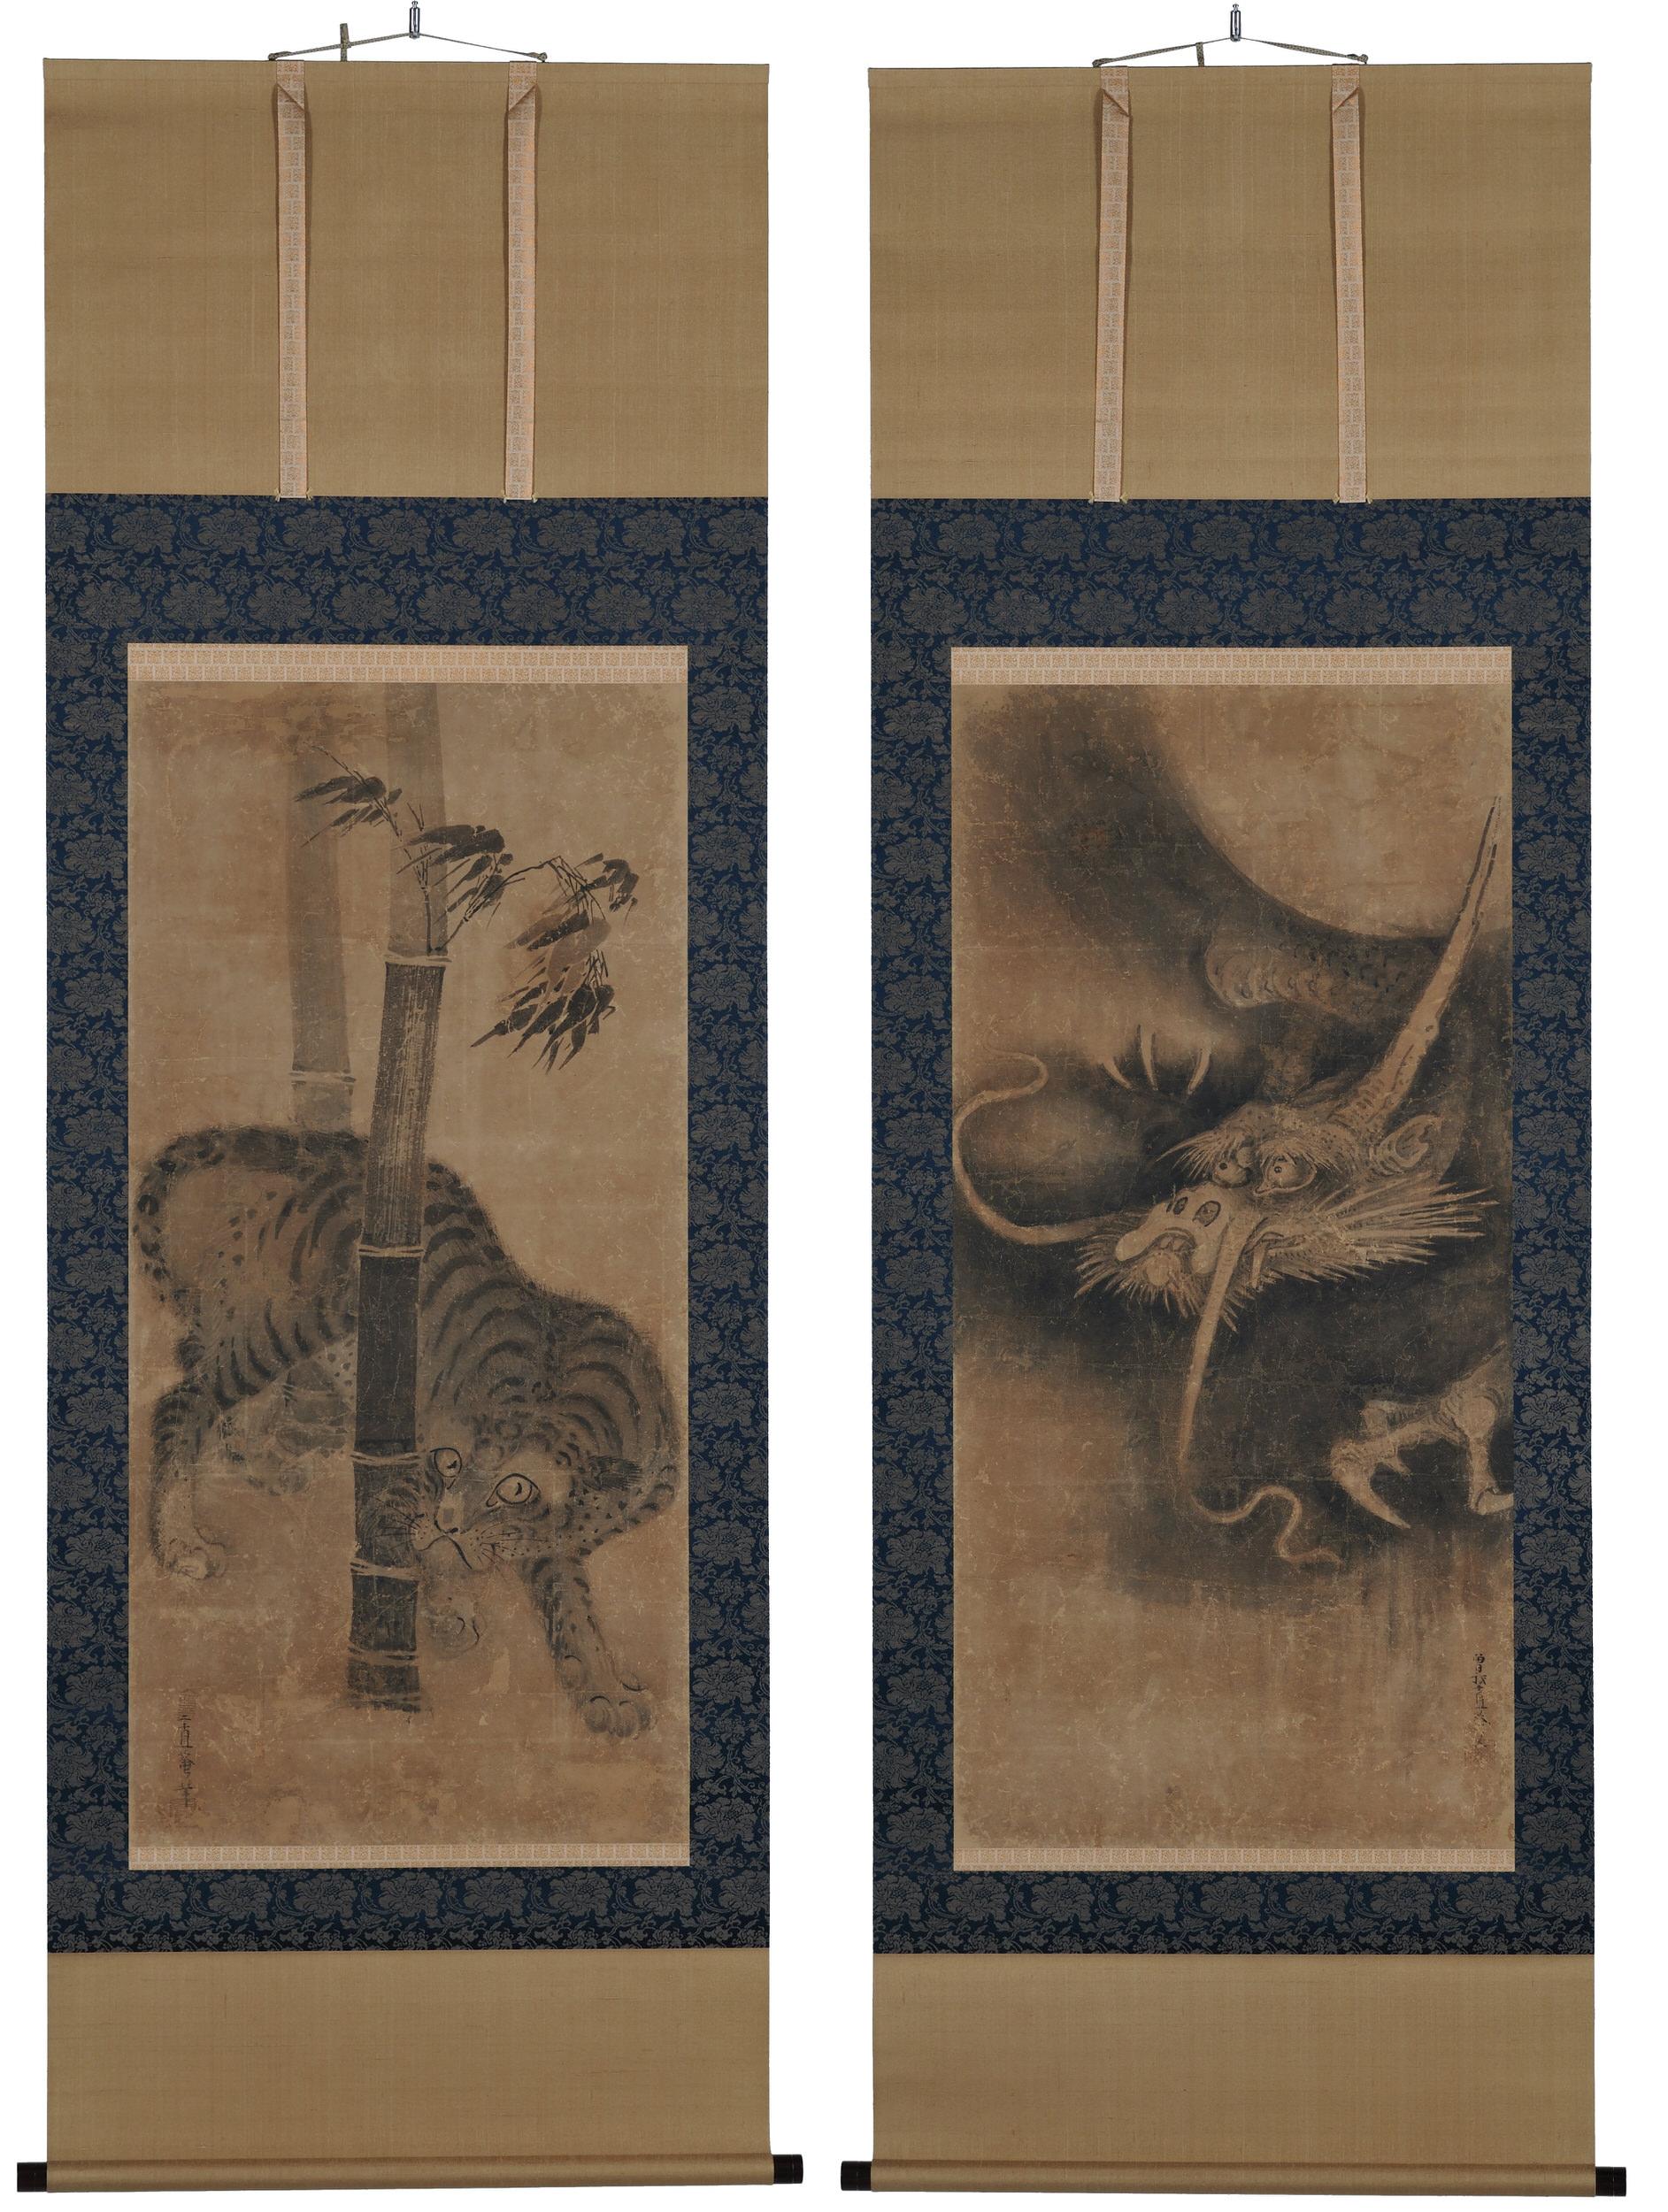 Tiger and Dragon

Soga Nichokuan (active, circa 1625-1660)

Pair of hanging scrolls, ink on paper.

Dimensions:

Each scroll 118 cm x 57 cm.

Each image 215 cm x 73 cm.

This is a large and rare pair of dragon and tiger paintings by the